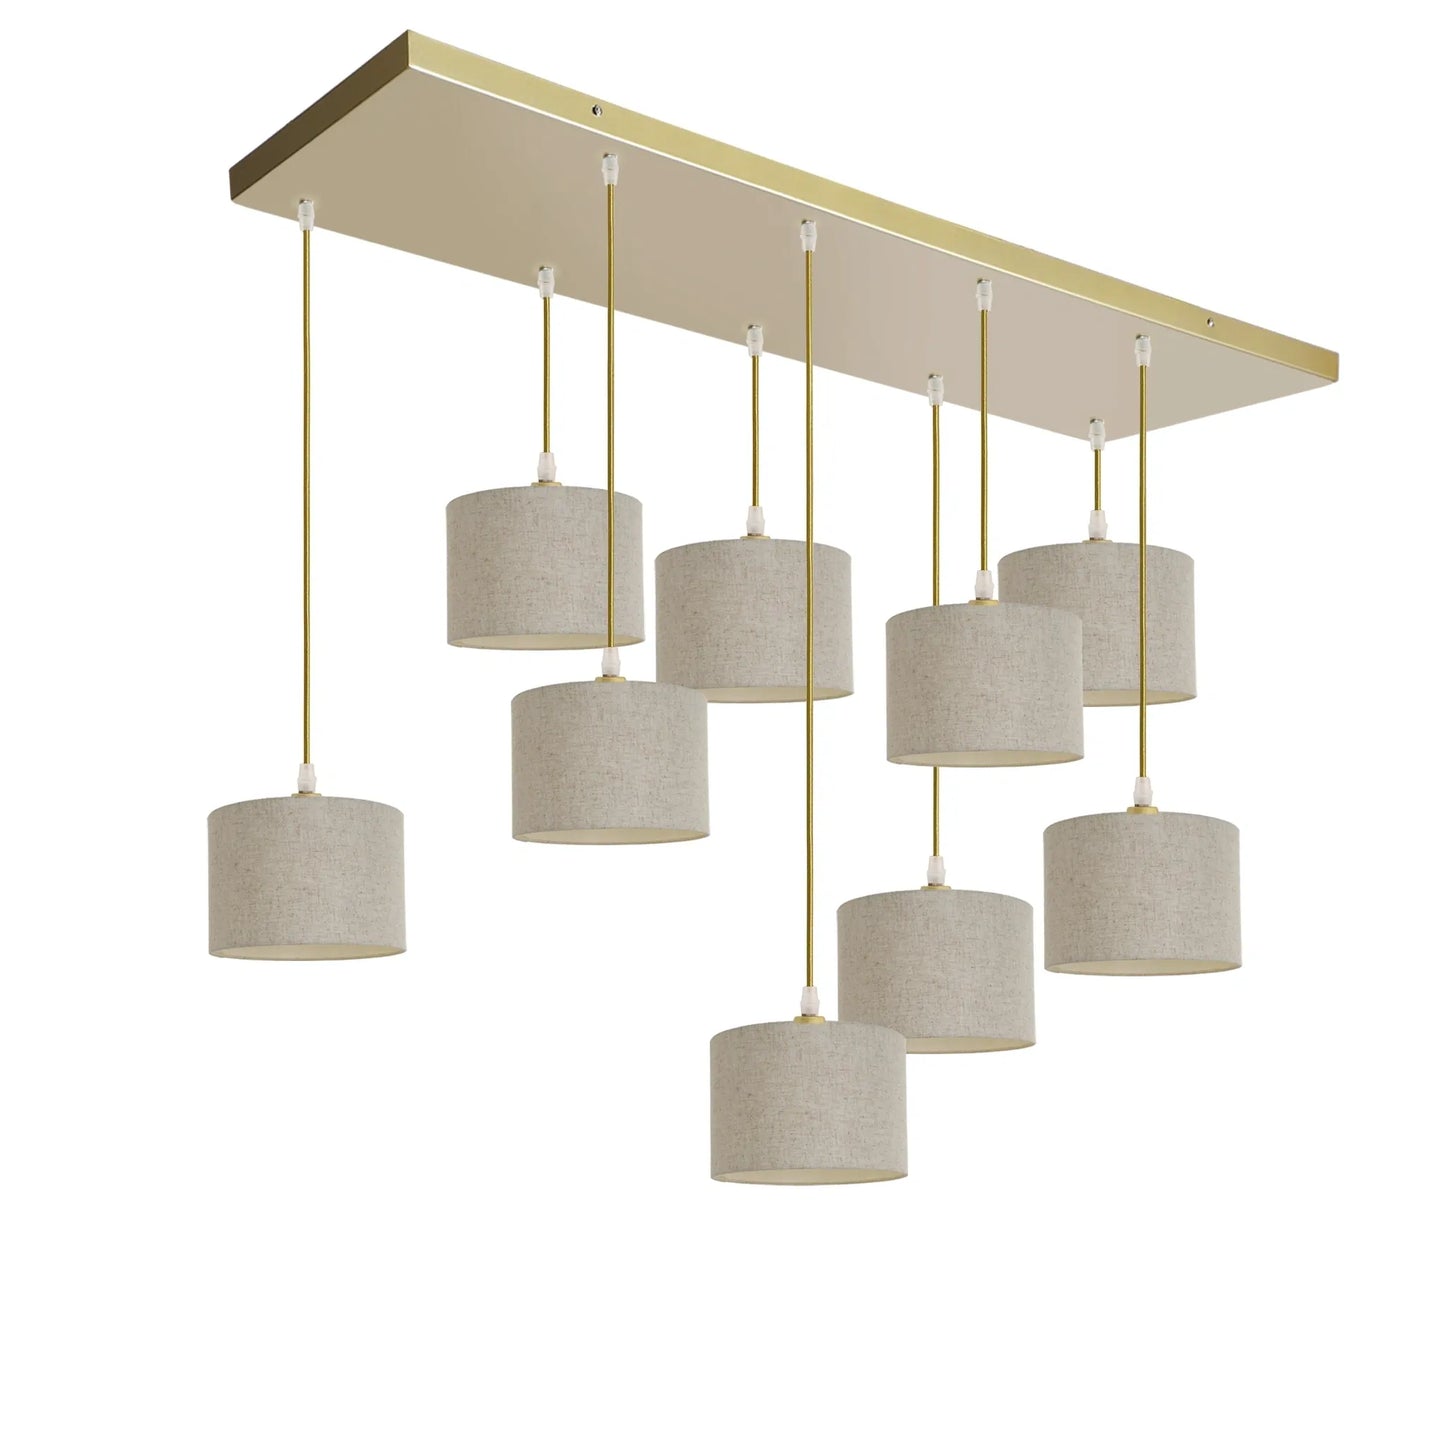 Murano 9 Light Gold with Hand Made fabric Shades